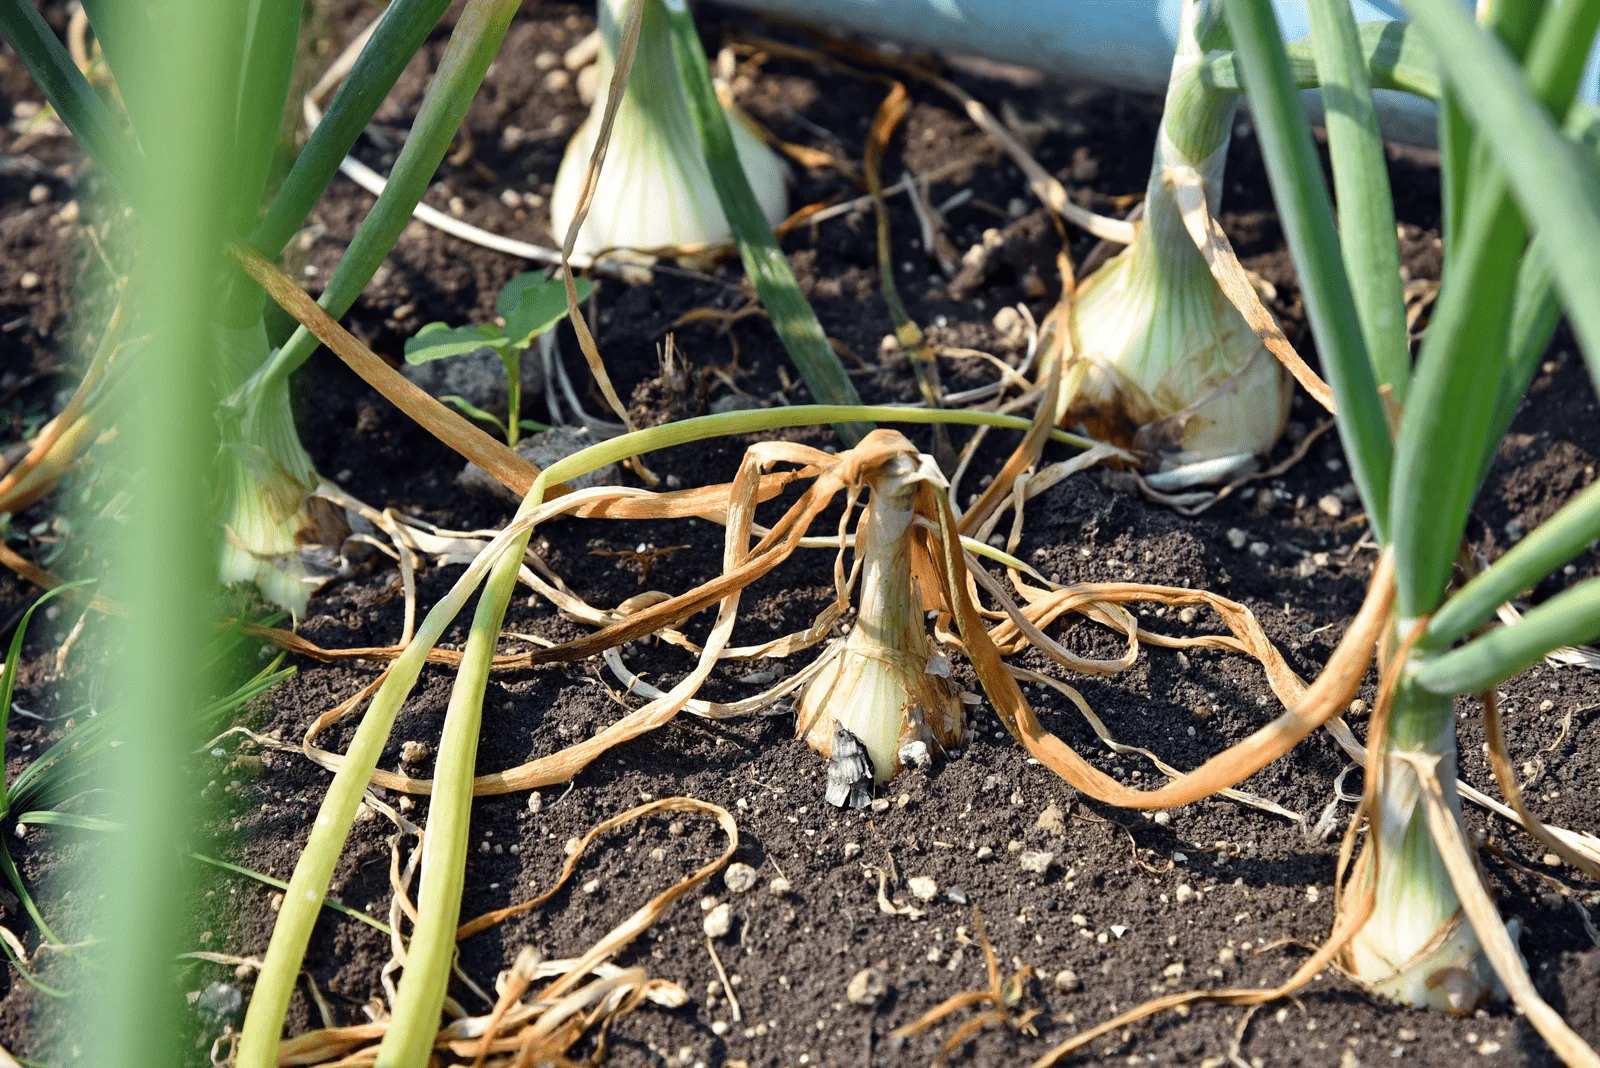 the onion dries while still in the ground